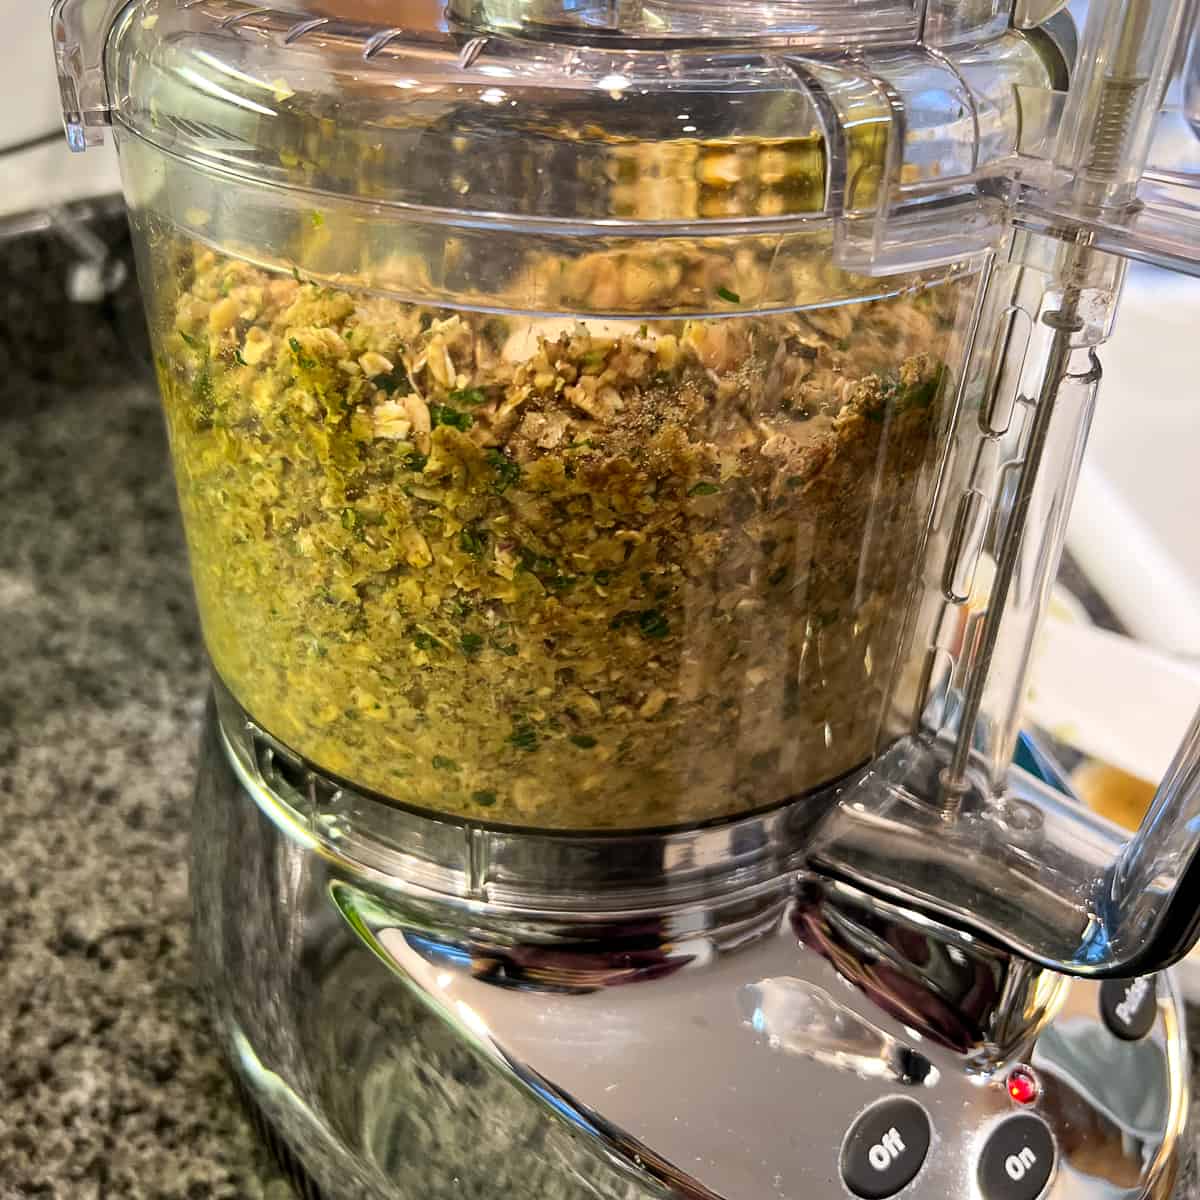 chickpea burger patty mixture being processed in the food processor